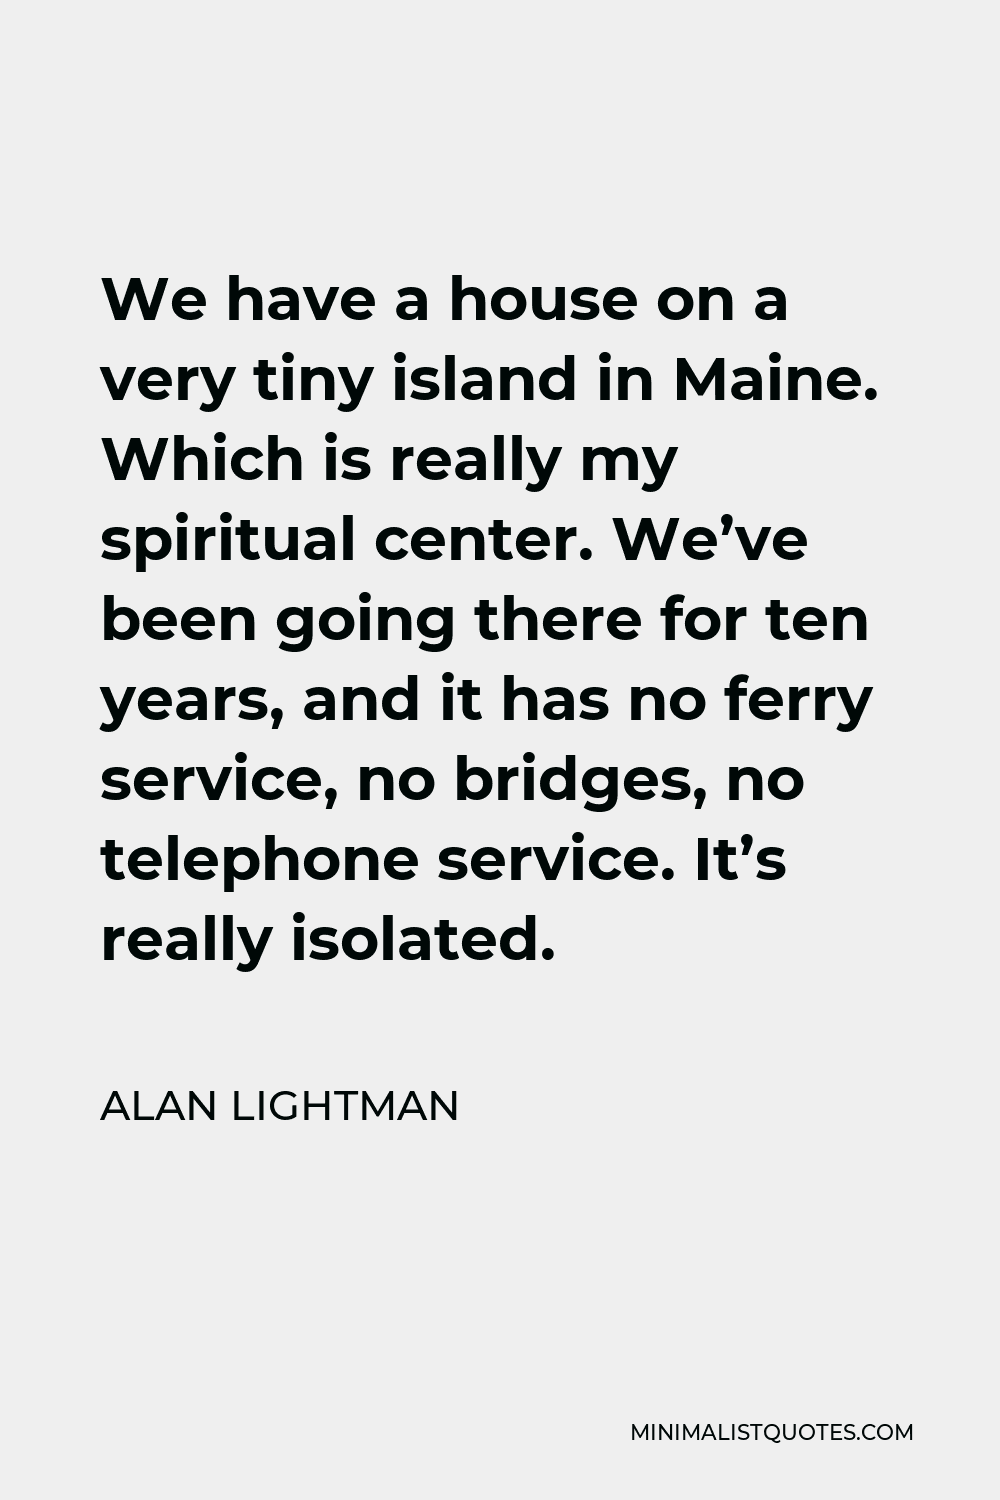 Alan Lightman Quote - We have a house on a very tiny island in Maine. Which is really my spiritual center. We’ve been going there for ten years, and it has no ferry service, no bridges, no telephone service. It’s really isolated.